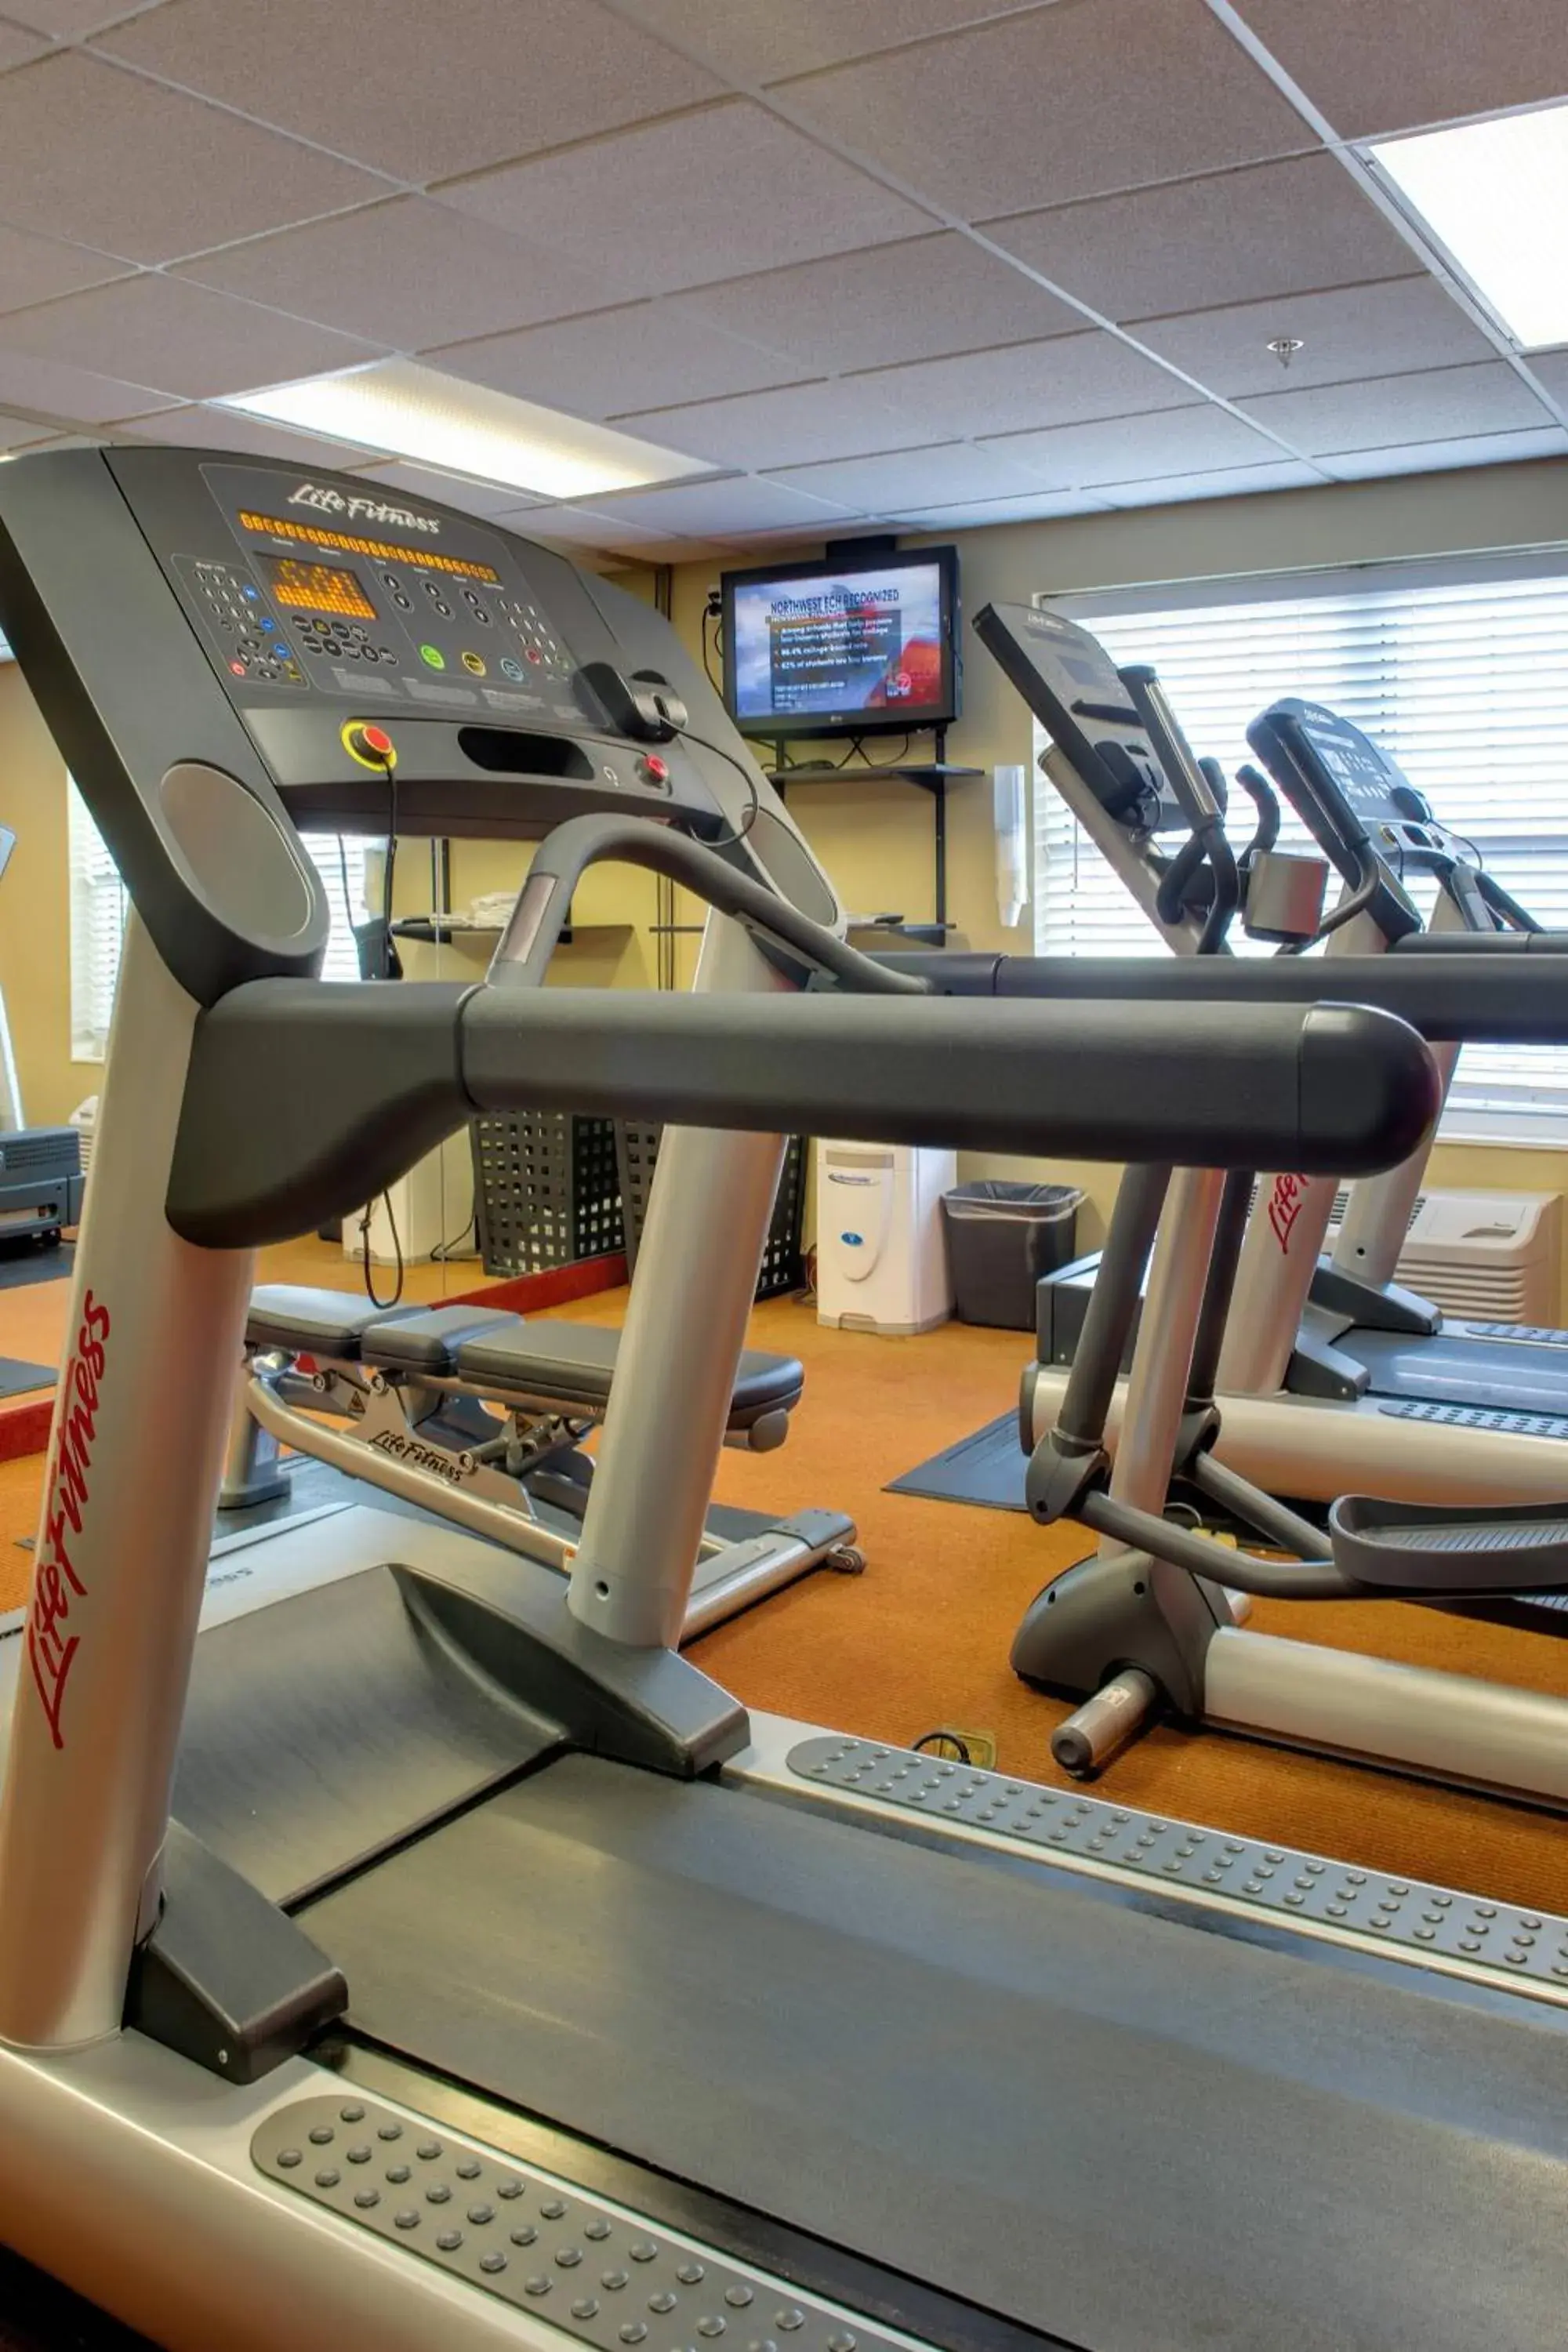 Fitness centre/facilities, Fitness Center/Facilities in TownePlace Suites by Marriott Las Cruces